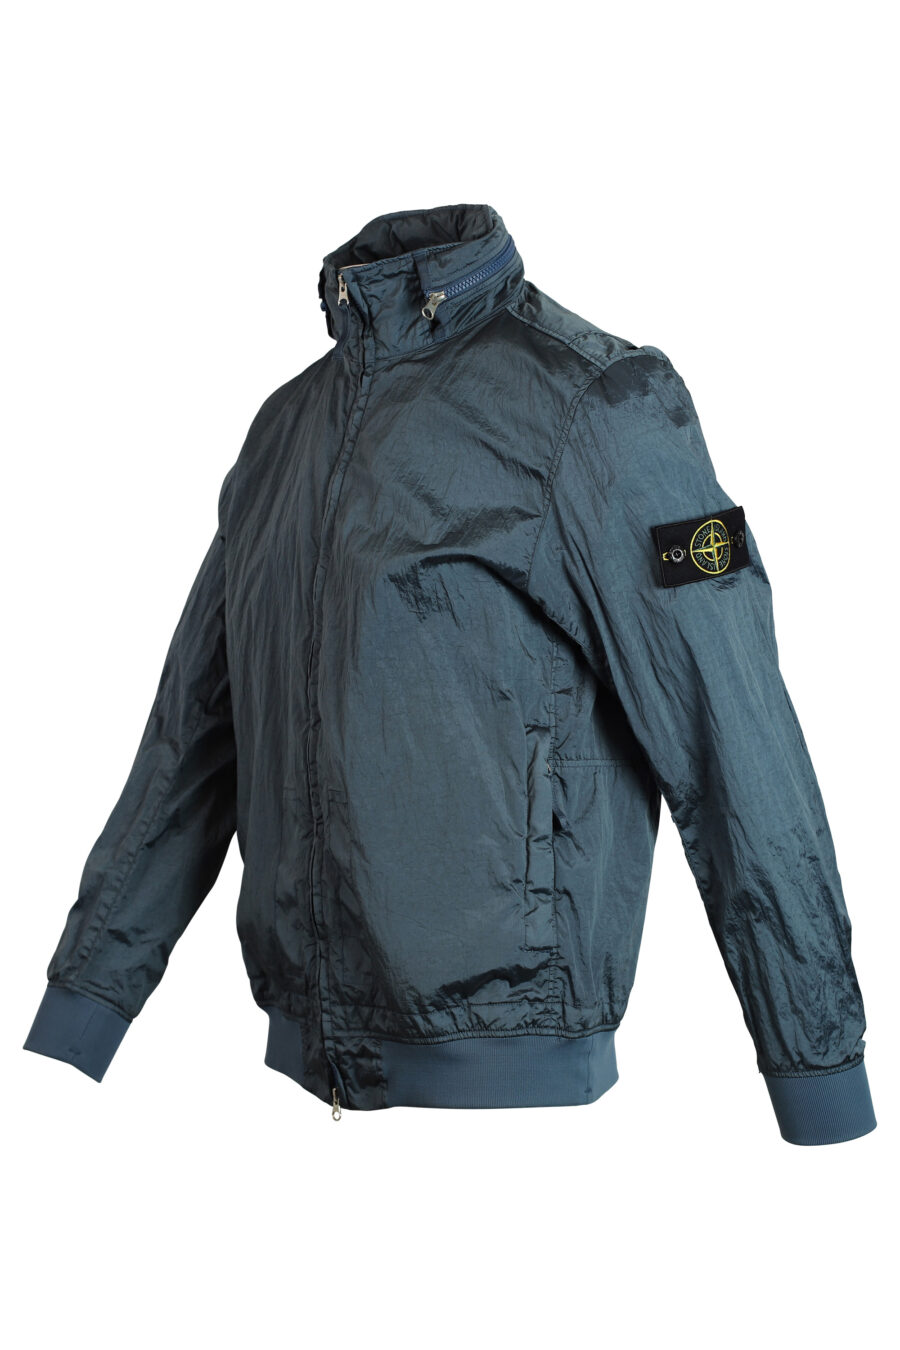 Dark blue jacket with hood and logo patch - 8052572537233 2